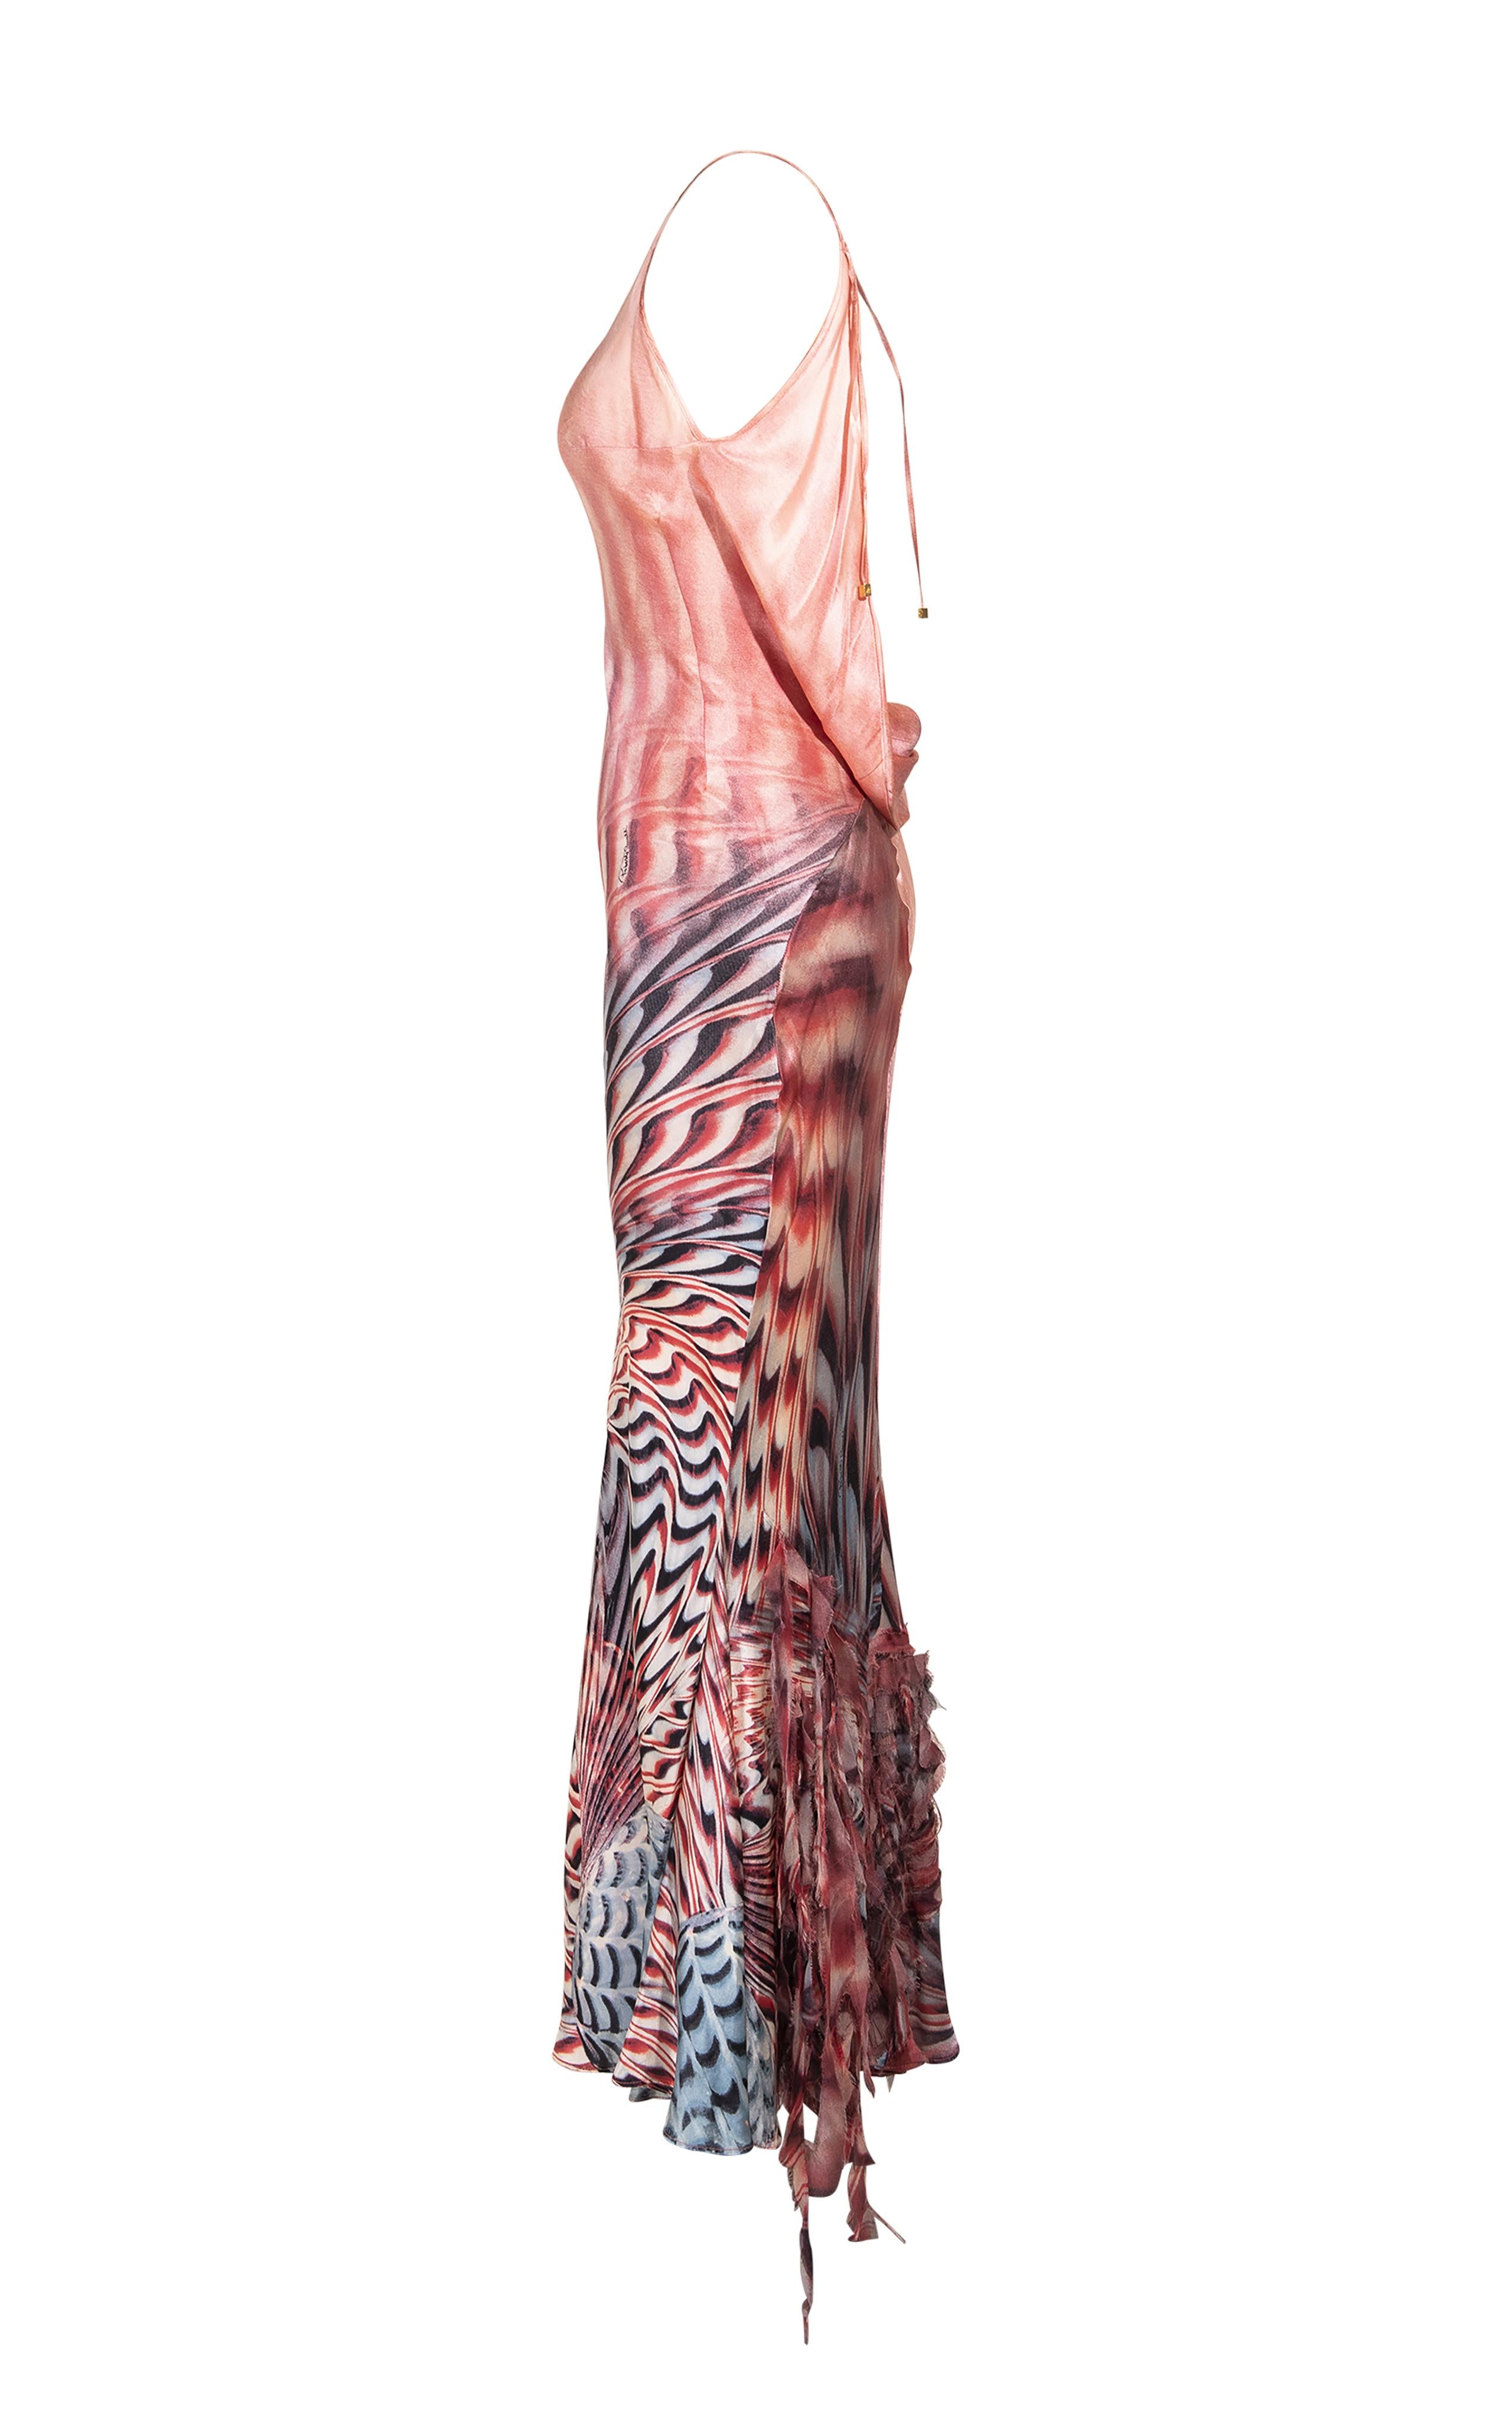 S/S 2001 Roberto Cavalli Psychedelic Silk Slip Gown In Good Condition In North Hollywood, CA